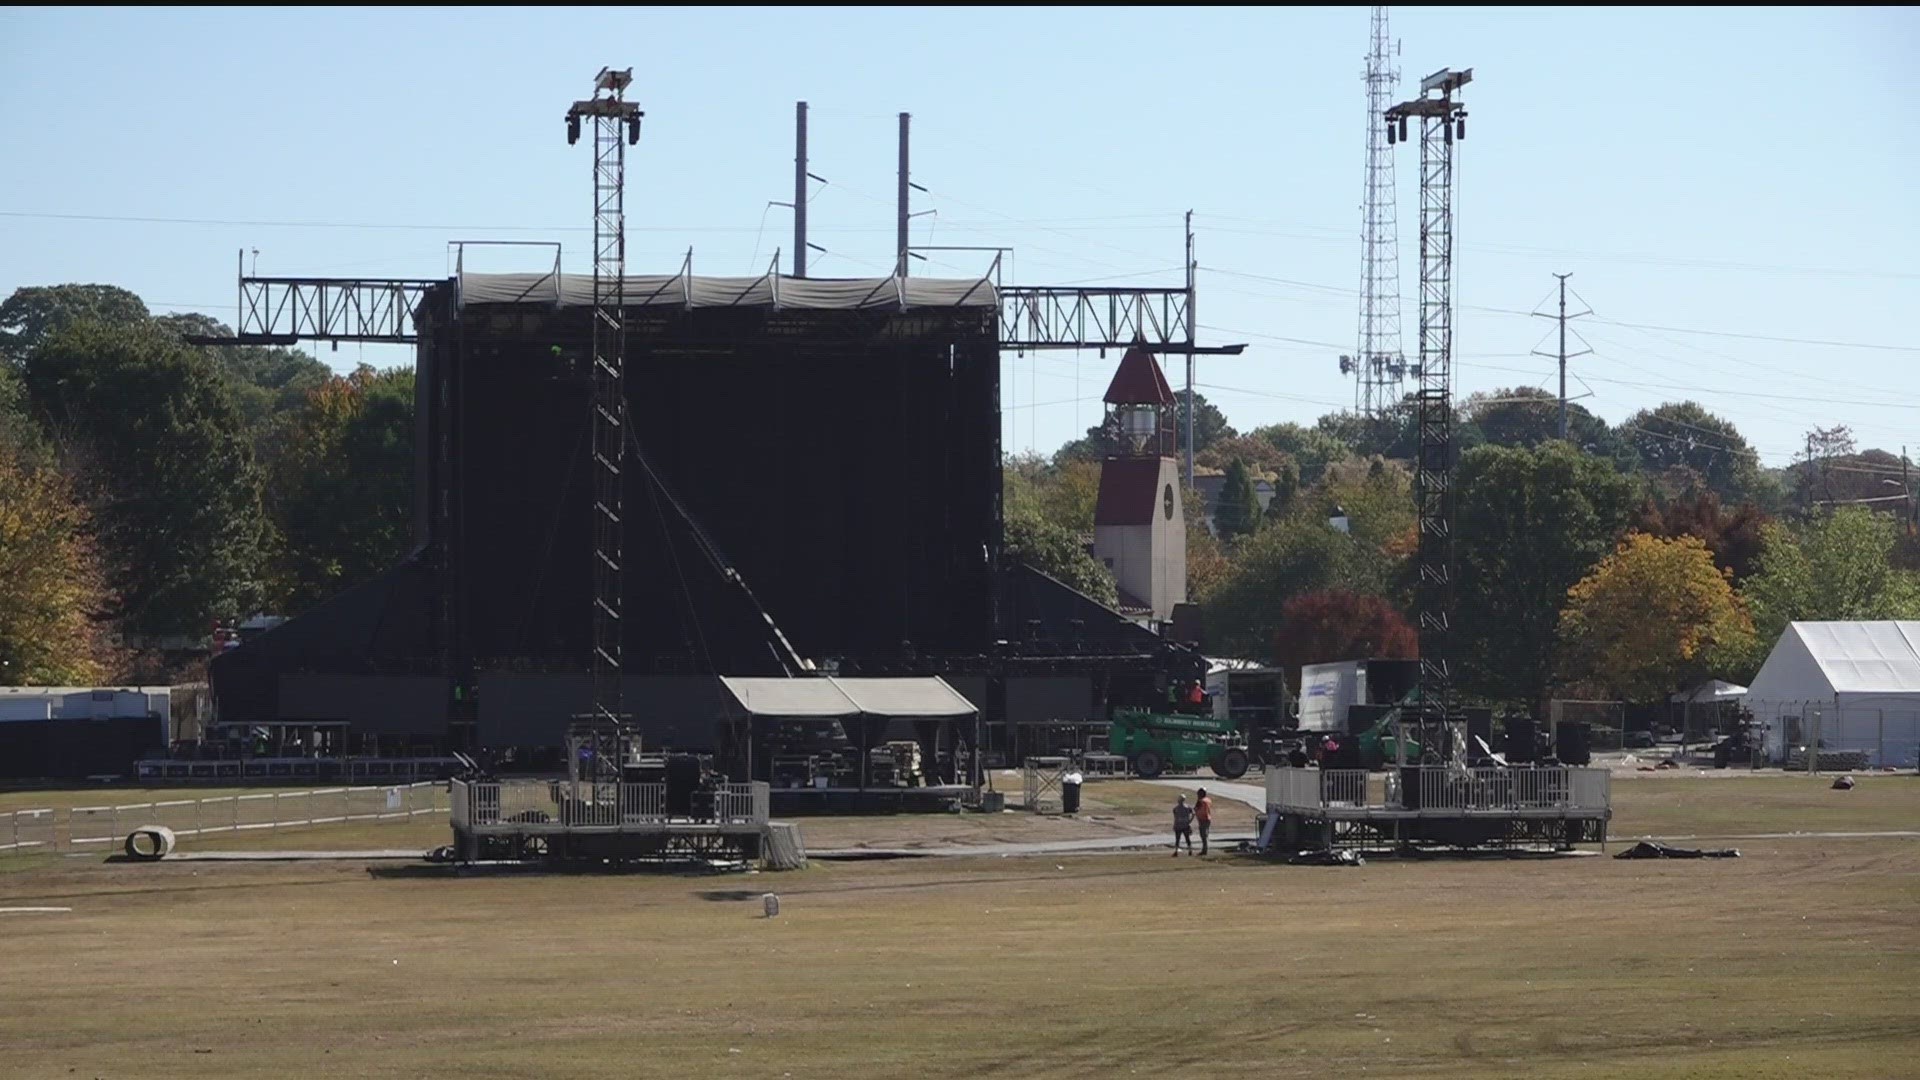 Cleanup continues after One Musicfest. Organizers estimated 45,000 people attended the festival this past weekend.